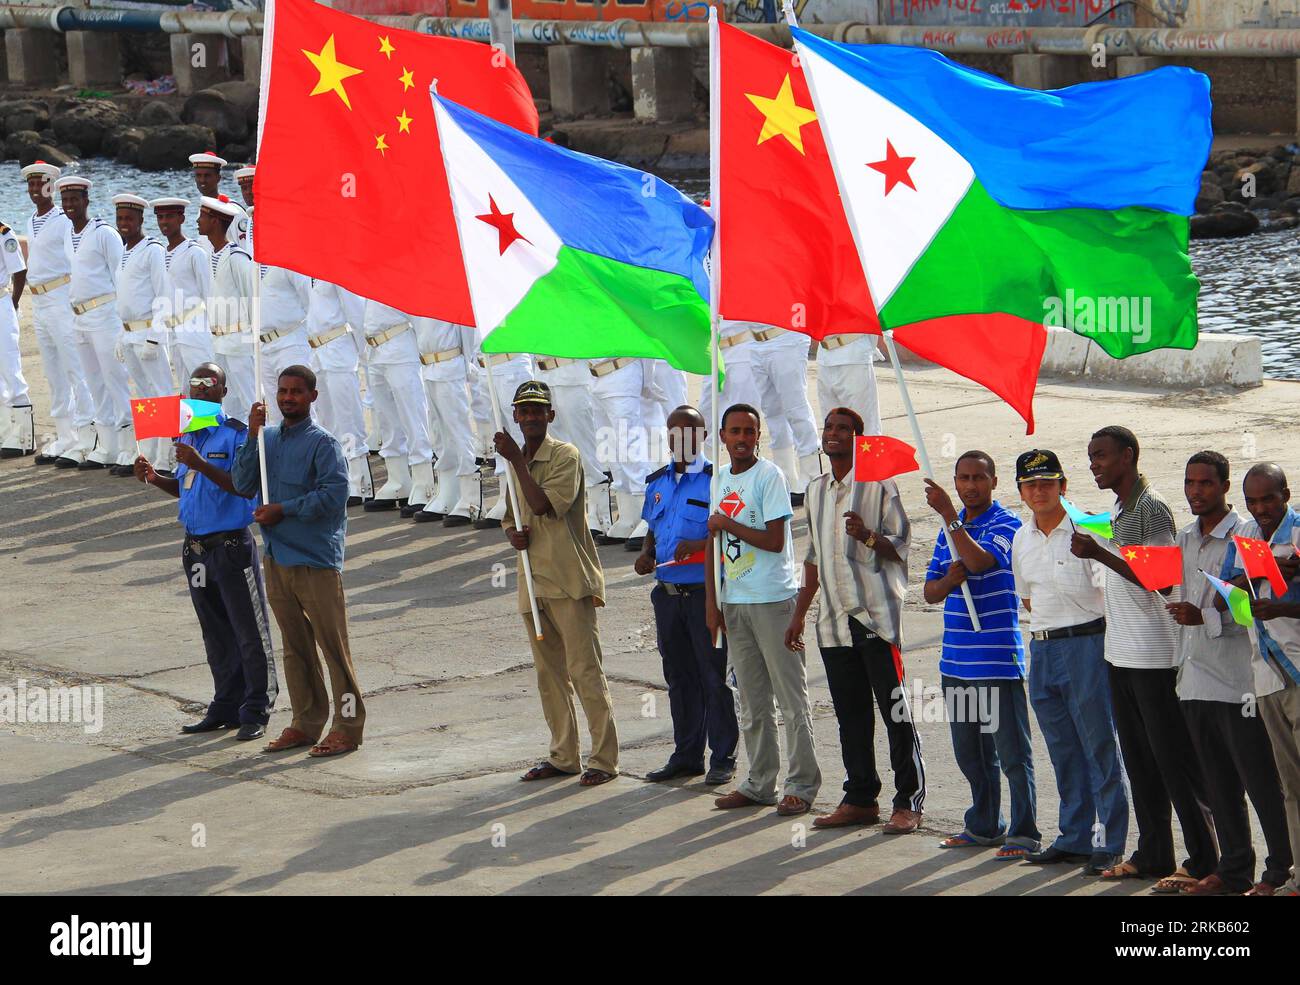 Bildnummer: 54485735  Datum: 29.09.2010  Copyright: imago/Xinhua (100929) -- DJIBOUTI, Sept. 29, 2010 (Xinhua) -- wave national flags of China and Djibouti in front of China s hospital ship Peace Ark at the port of Djibouti, Sept. 29, 2010. The Peace Ark left for Kenya on Wednesday after providing medical services for local residents in Djibouti for a week. (Xinhua/Zha Chunming) (nxl) DJIBOUTI-CHINA-HOSPITAL SHIP-PEACE ARK-DEPARTURE PUBLICATIONxNOTxINxCHN Gesellschaft Friedensschiff Abschied Verabschiedung Schiff kbdig xsk 2010 quer  Hospitalschiff Krankenhausschiff    Bildnummer 54485735 Date Stock Photo